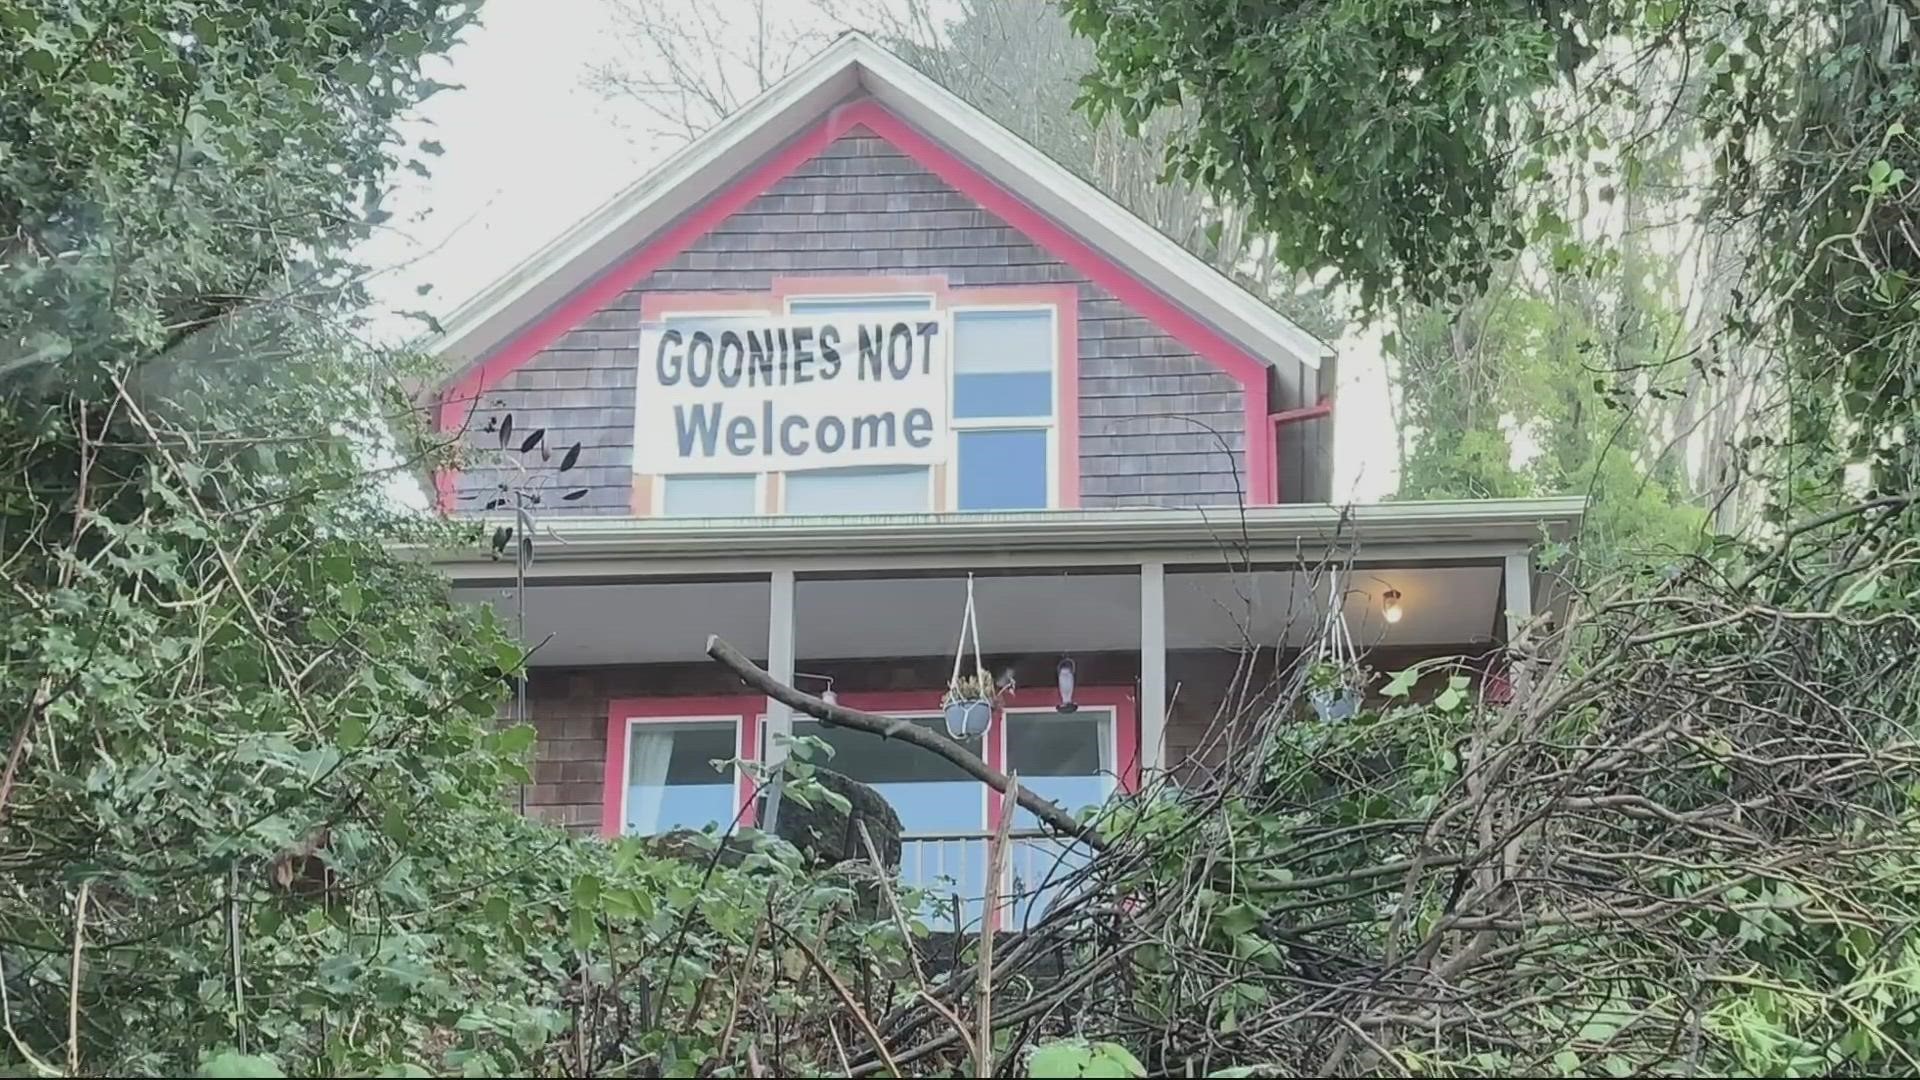 One neighbor of the house from the iconic 1985 movie, "The Goonies," hung a large banner on their house telling fans of the movie to stay away.